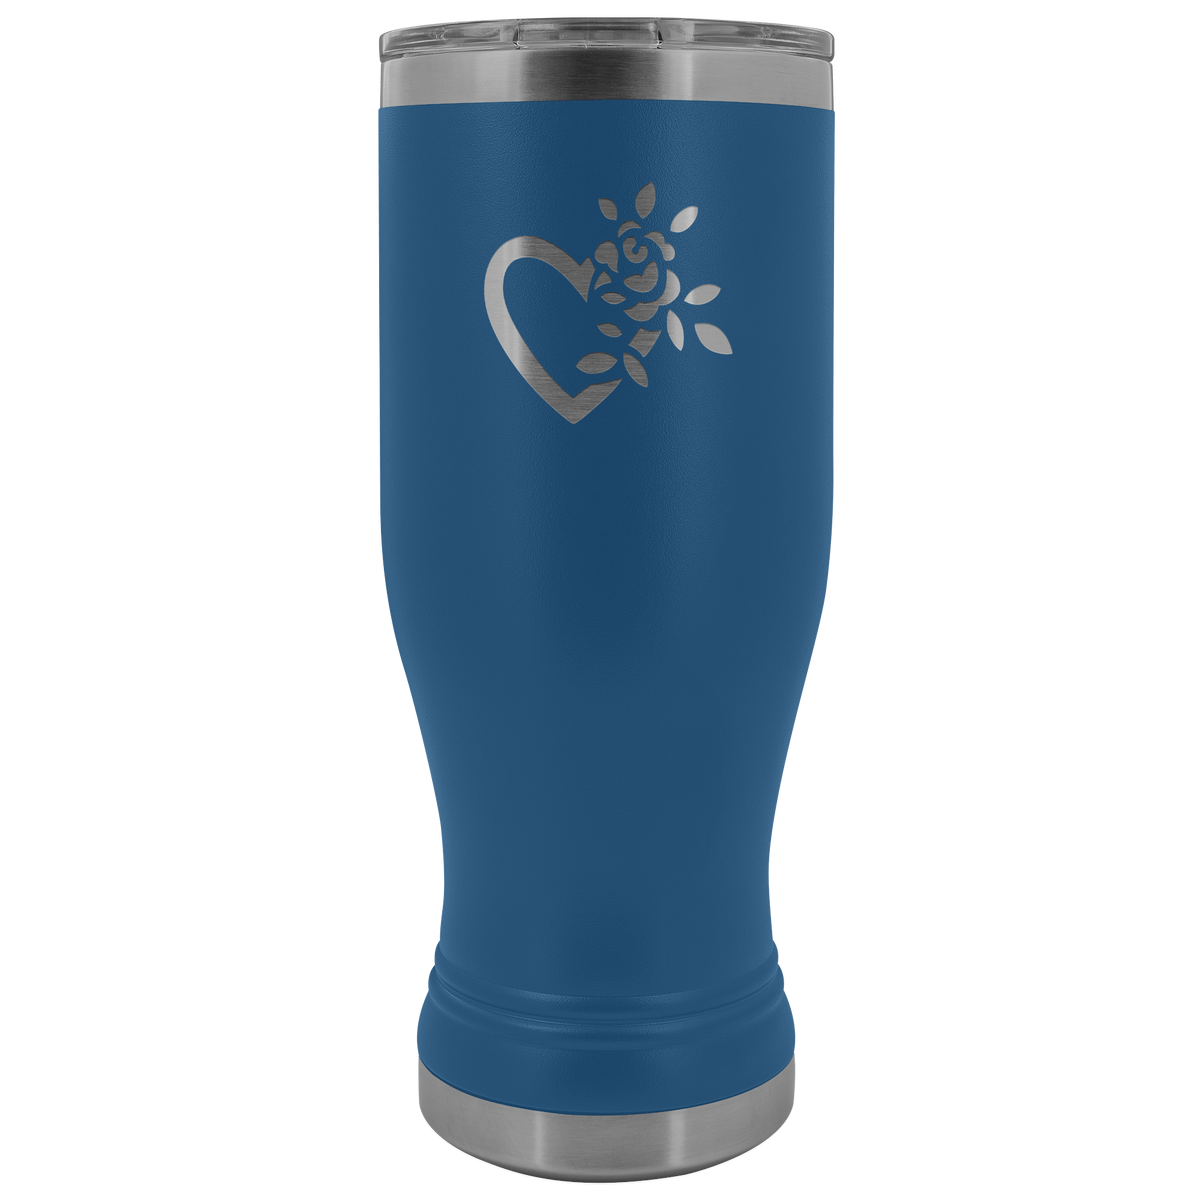 A flowering heart 20 oz stainless steel Vacuum insulated hot and cold beverage Tumbler